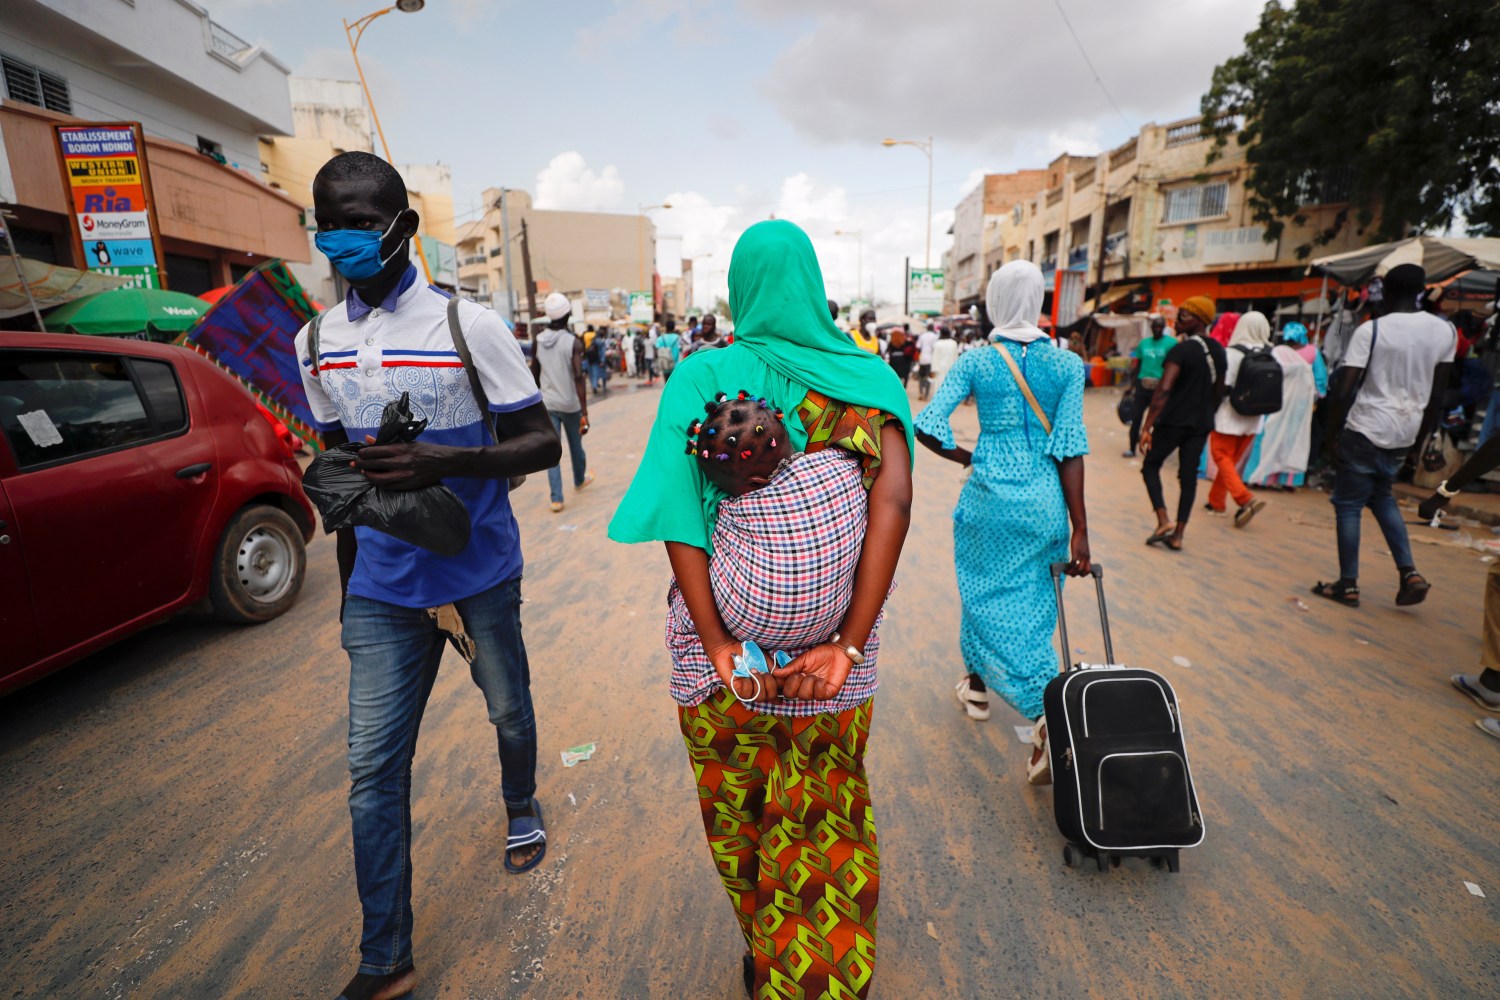 A woman carries her protective mask in her hands as hundreds of thousands of the Senegalese Mouride Brotherhood pilgrims gather for the annual Grand Magal festival, as the global spread of the coronavirus disease (COVID-19) continues, in the holy city of Touba, Senegal October 5, 2020. Picture taken October 5, 2020. REUTERS/Zohra Bensemra